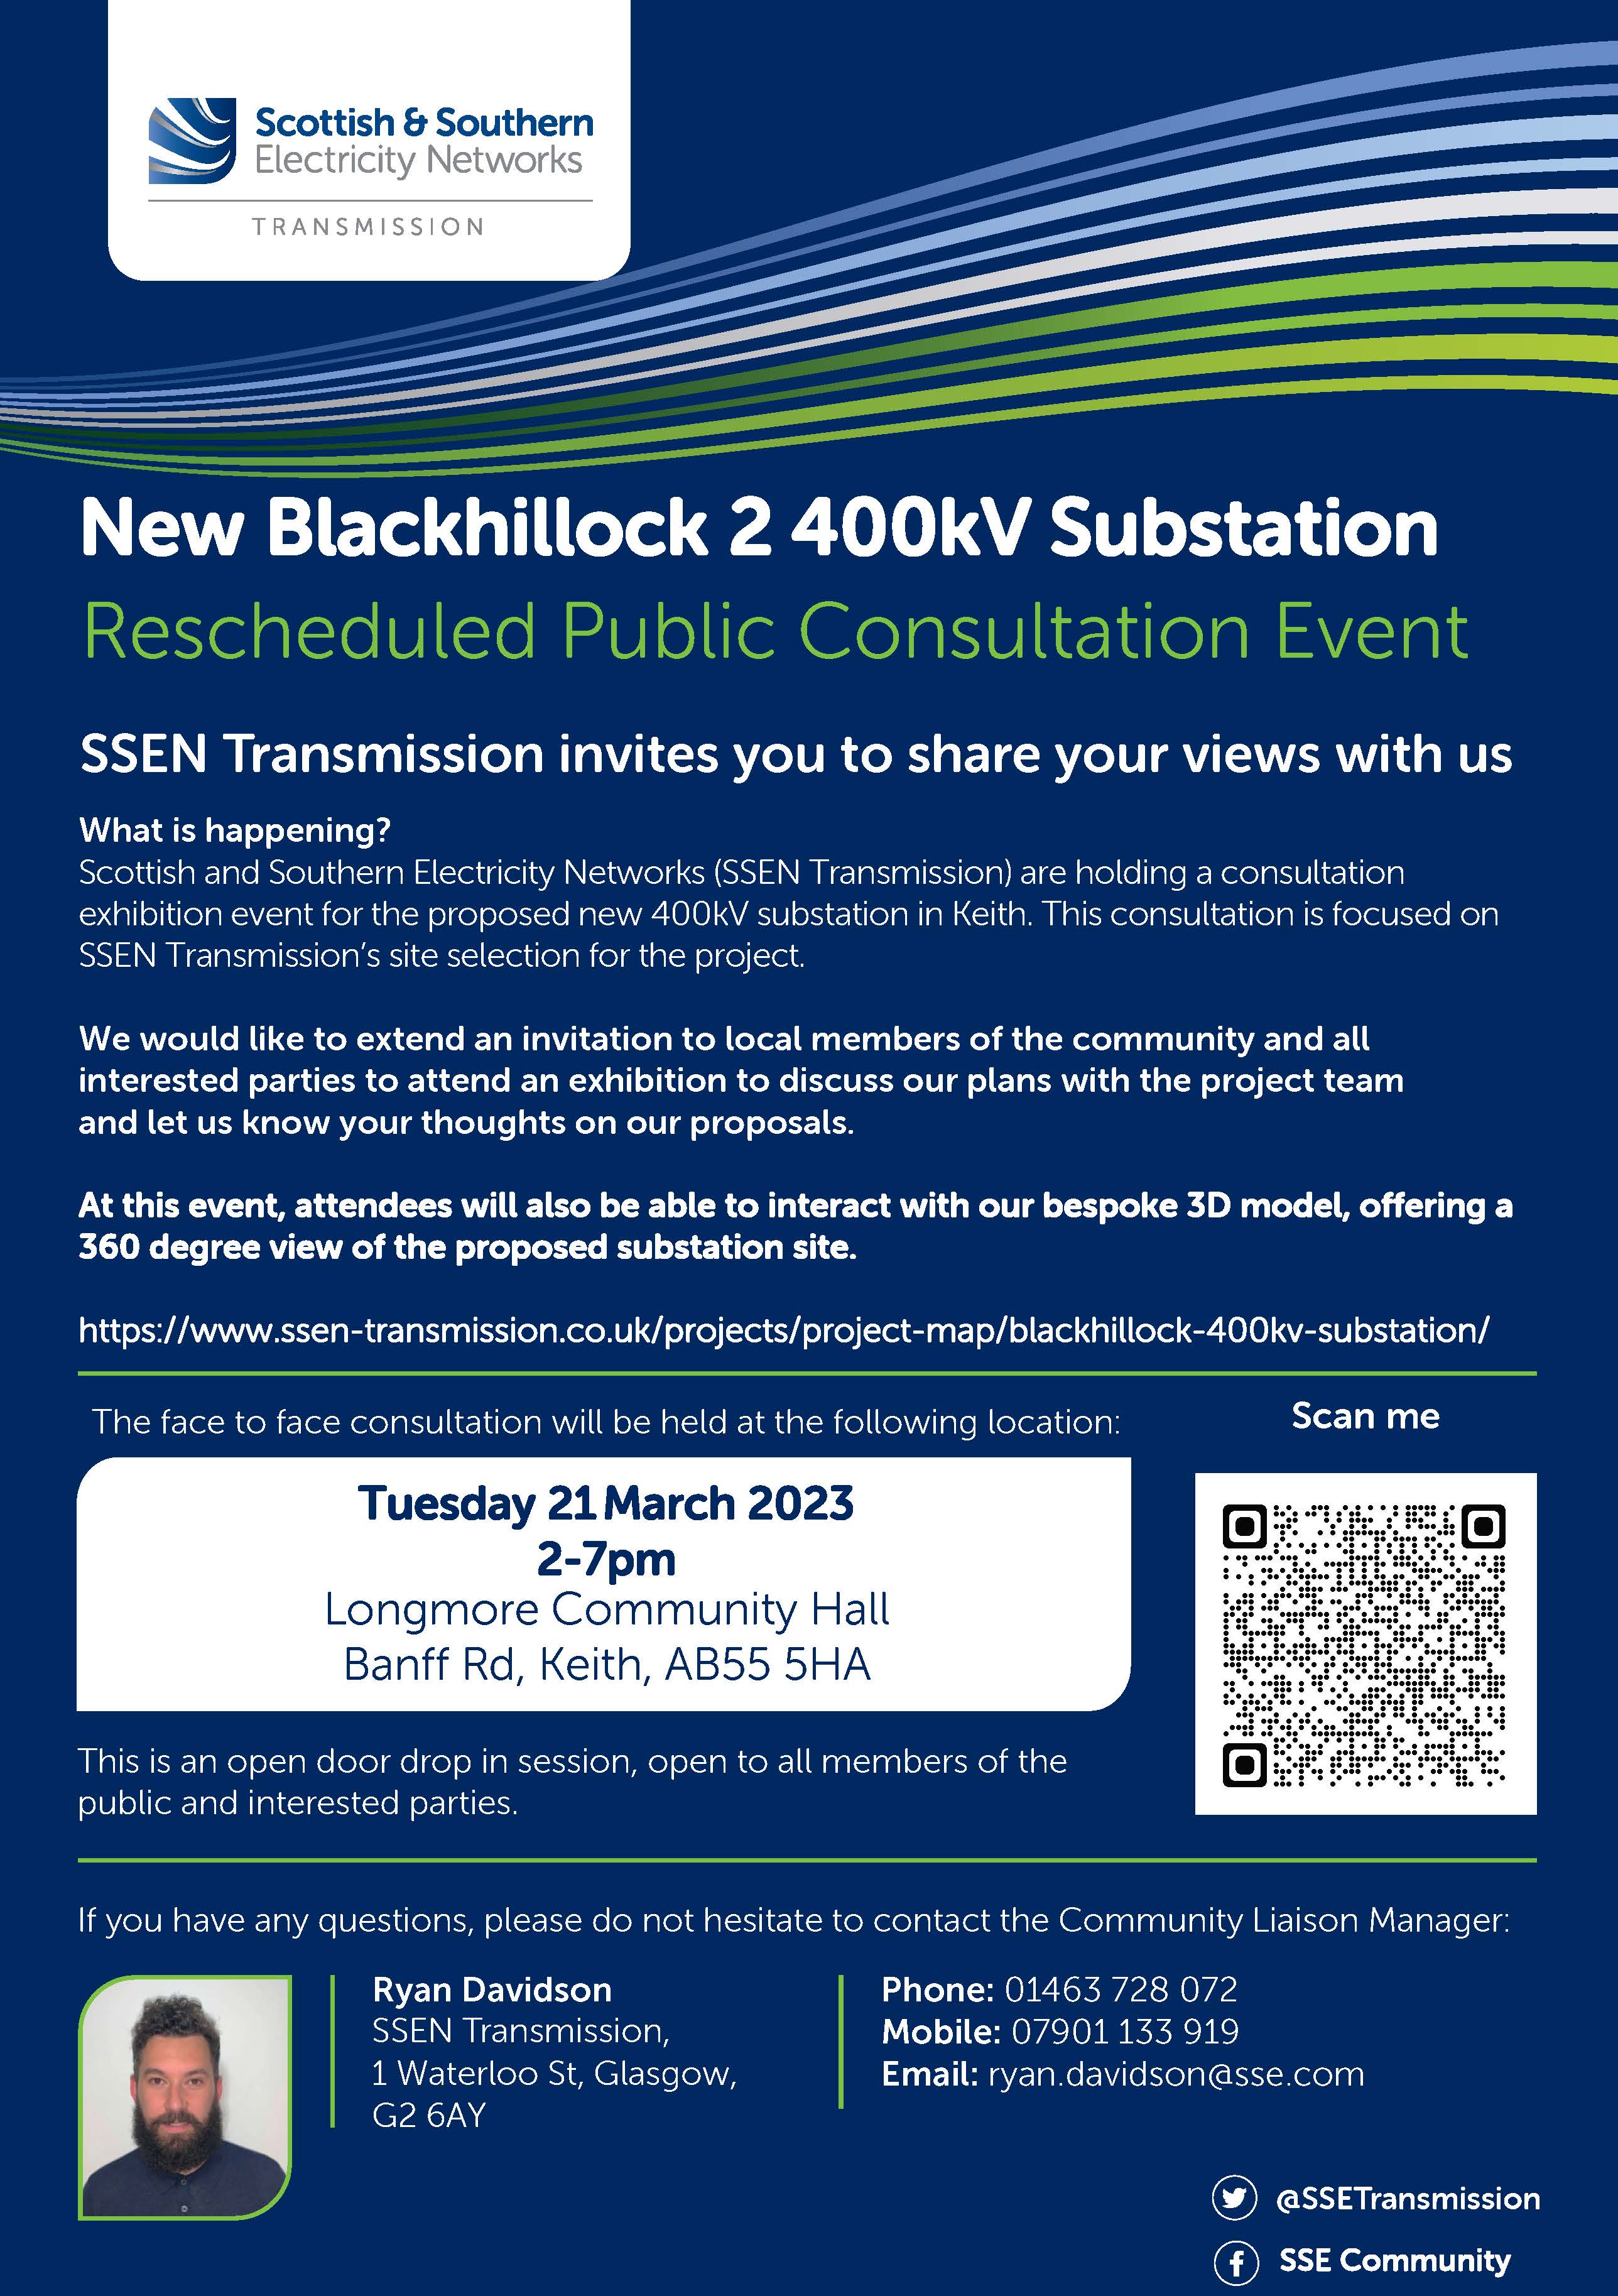 A postcard titled "New Blackhillock 2 400kV Substatino Rescheduled Public Consultation Event". Referring to a date of "Tuesday 21 March 2023".